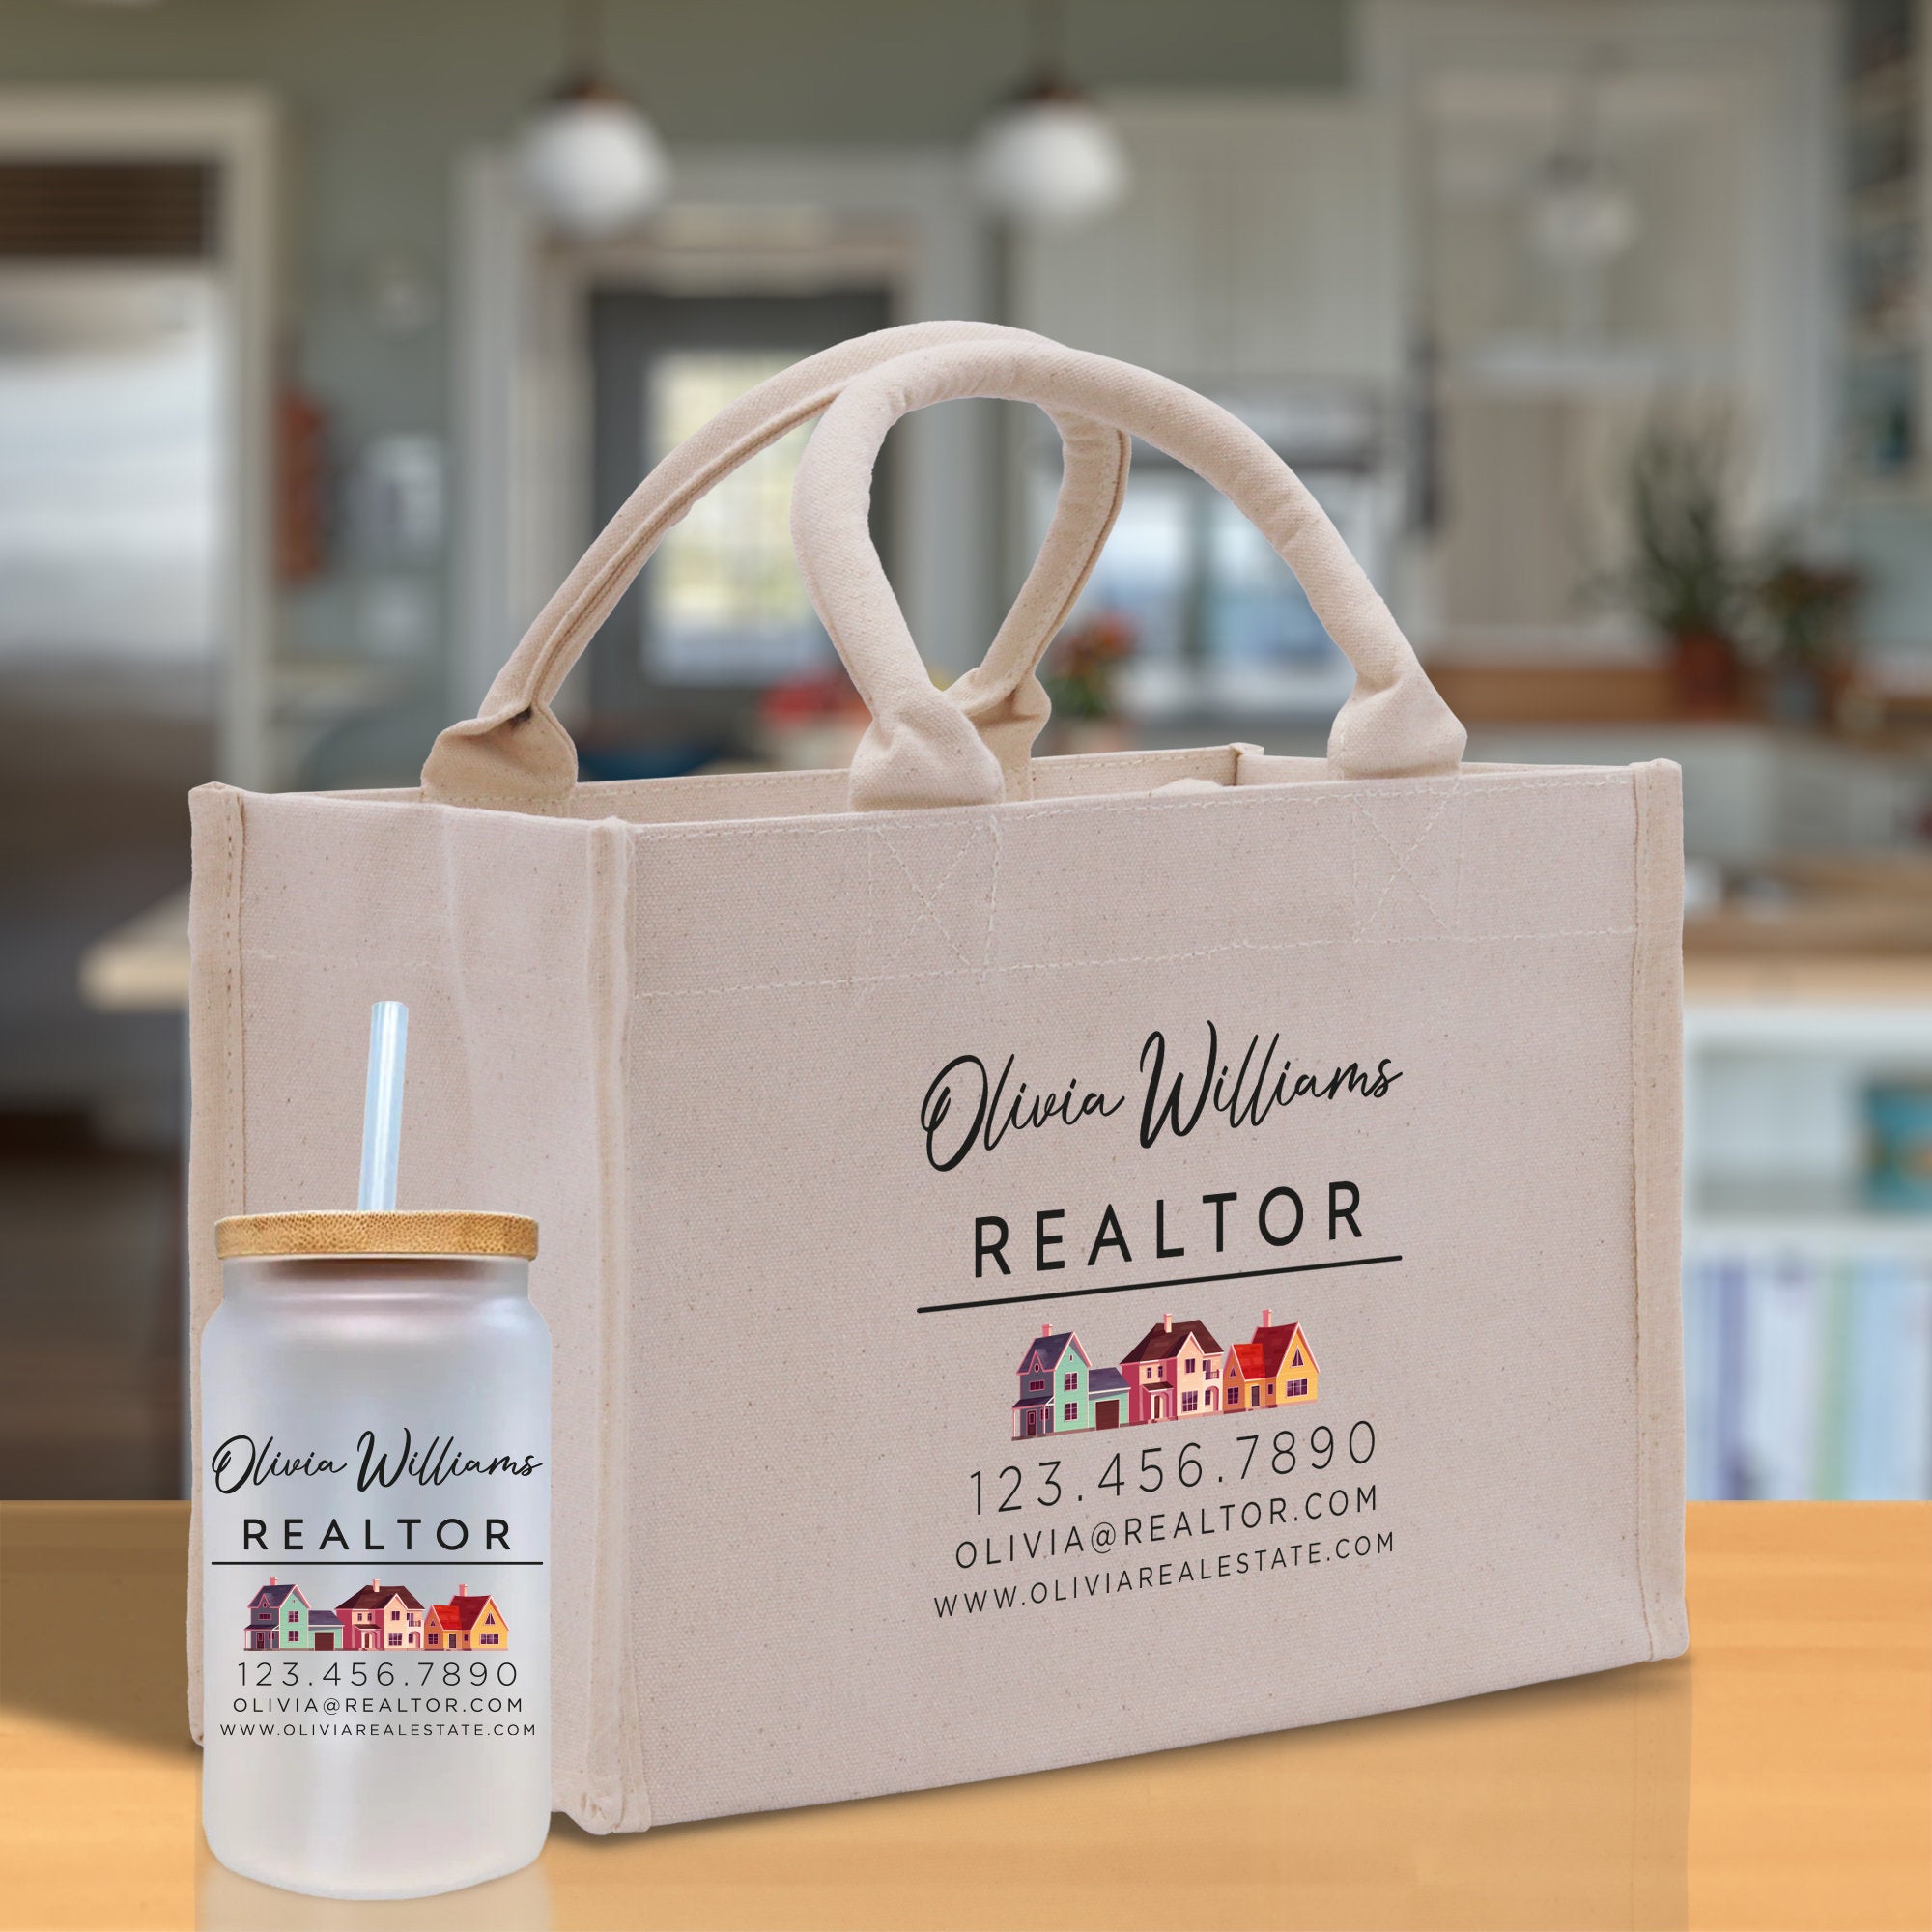 a bag and a bottle of realtor on a table